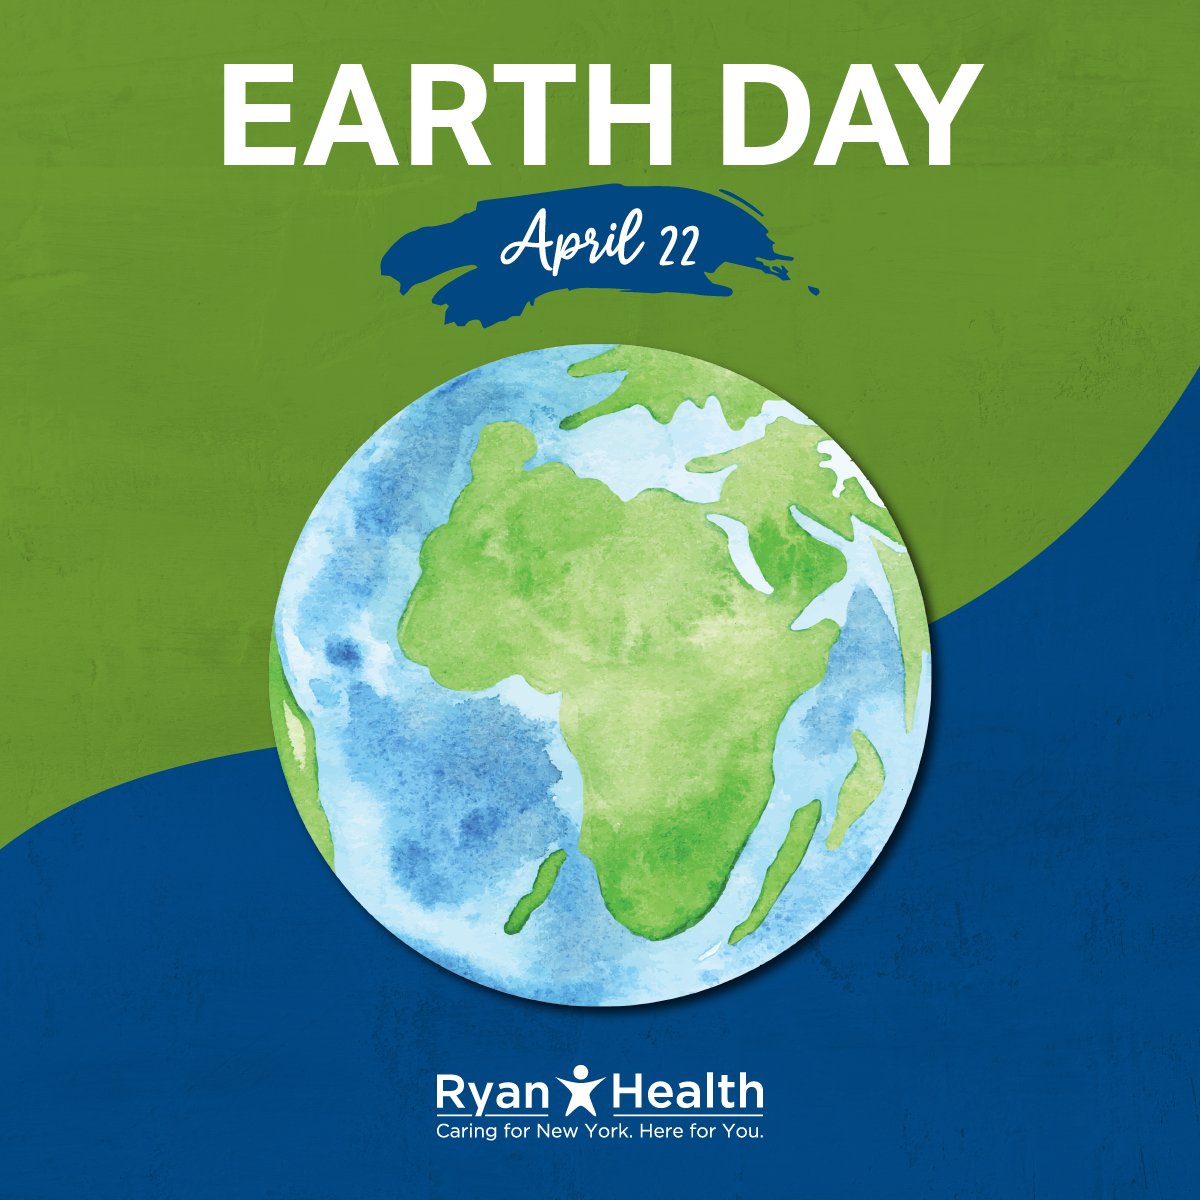 We have just one earth to call home. If we have a healthy earth, we will have healthier humans. We must do all we can to protect our planet for future generations so we can all live a healthier life! #EarthDay.